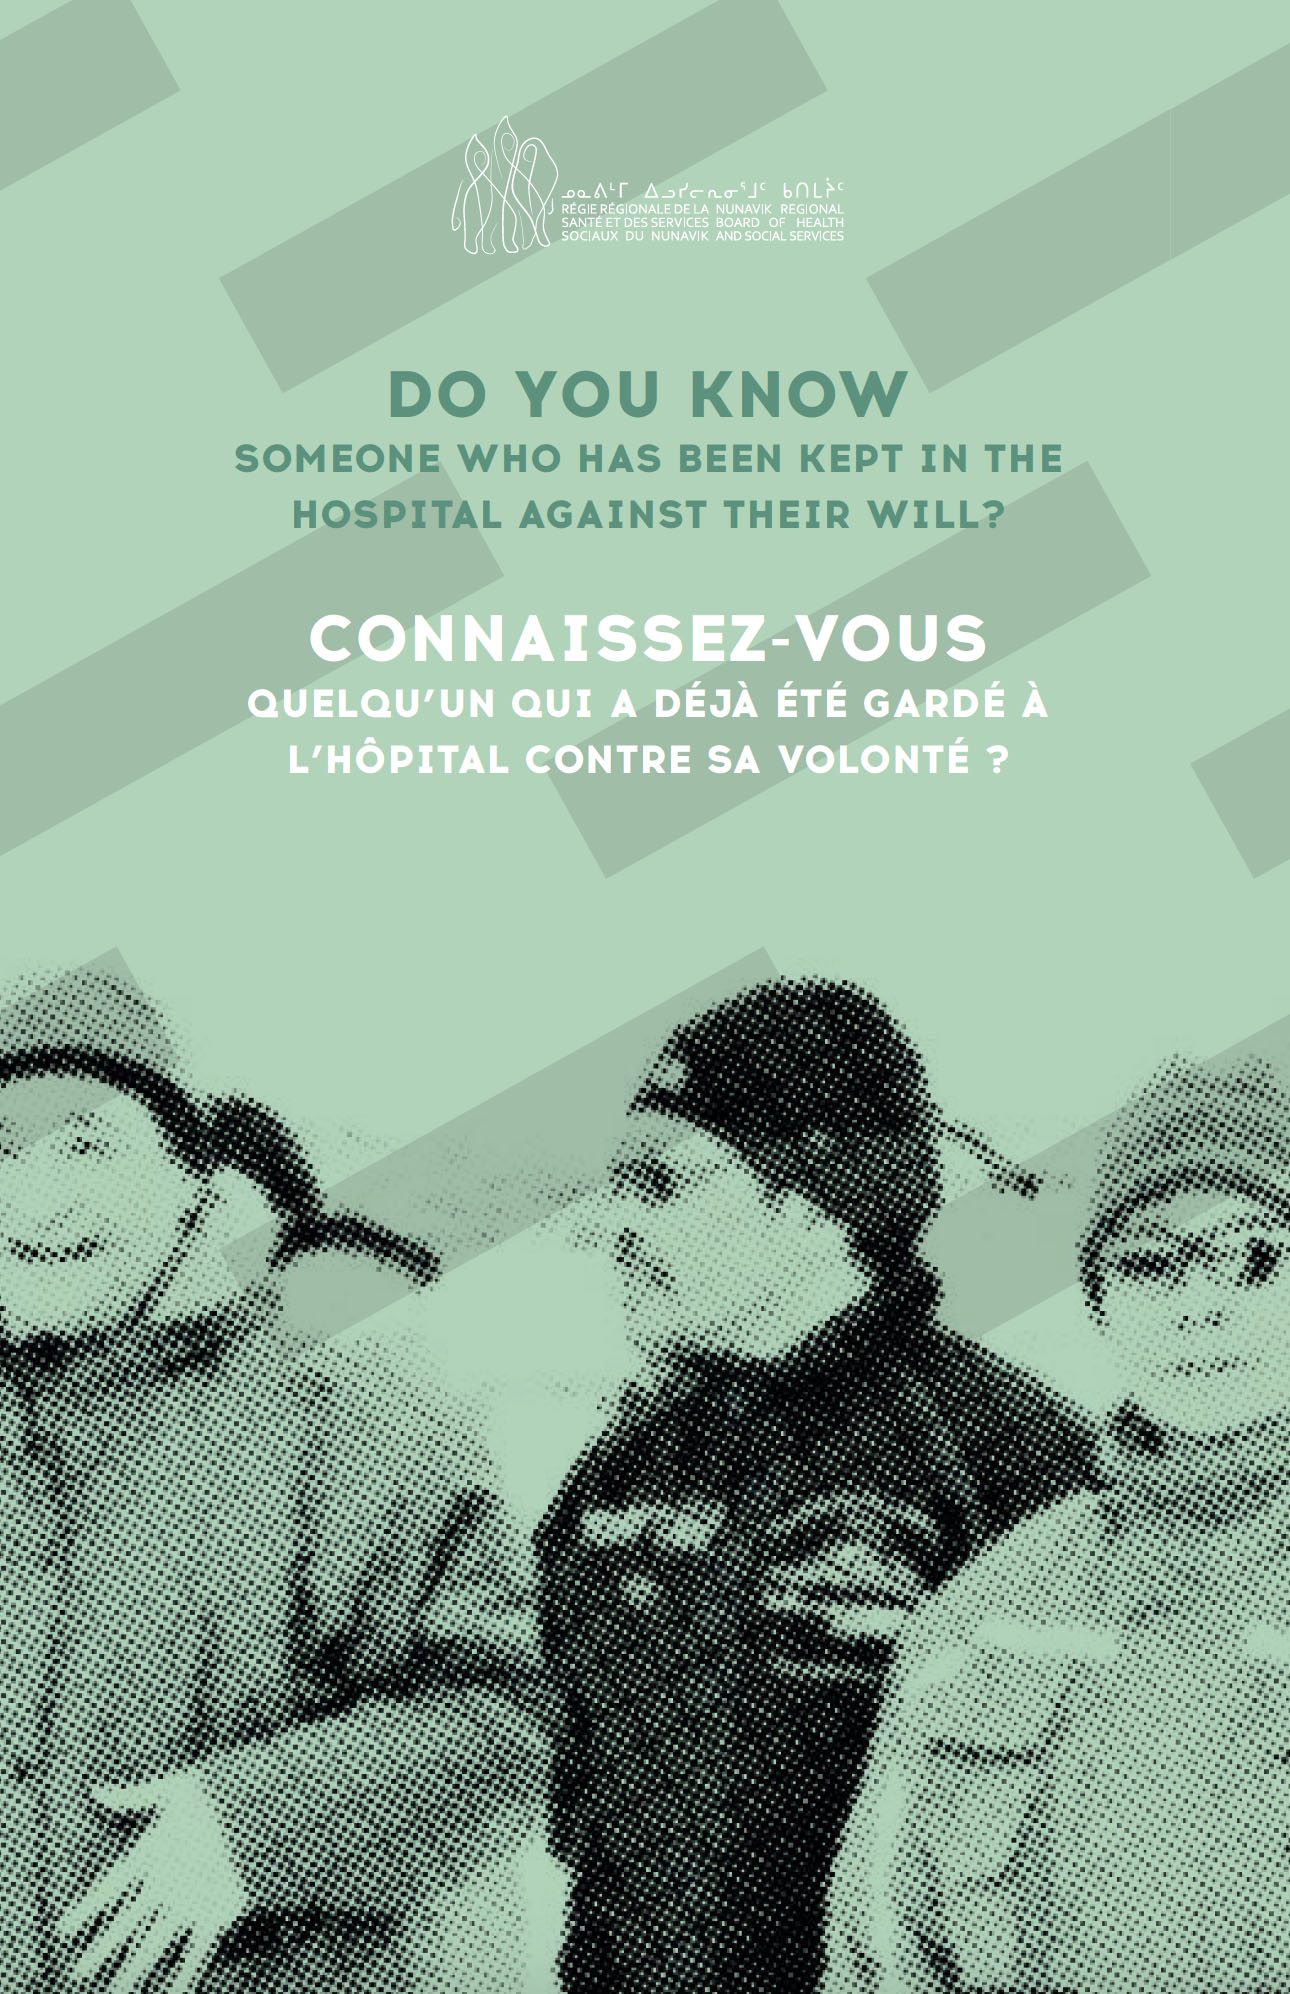 Dowload booklet entitled "Do you know someone who has been kept in the hospital against their will?"